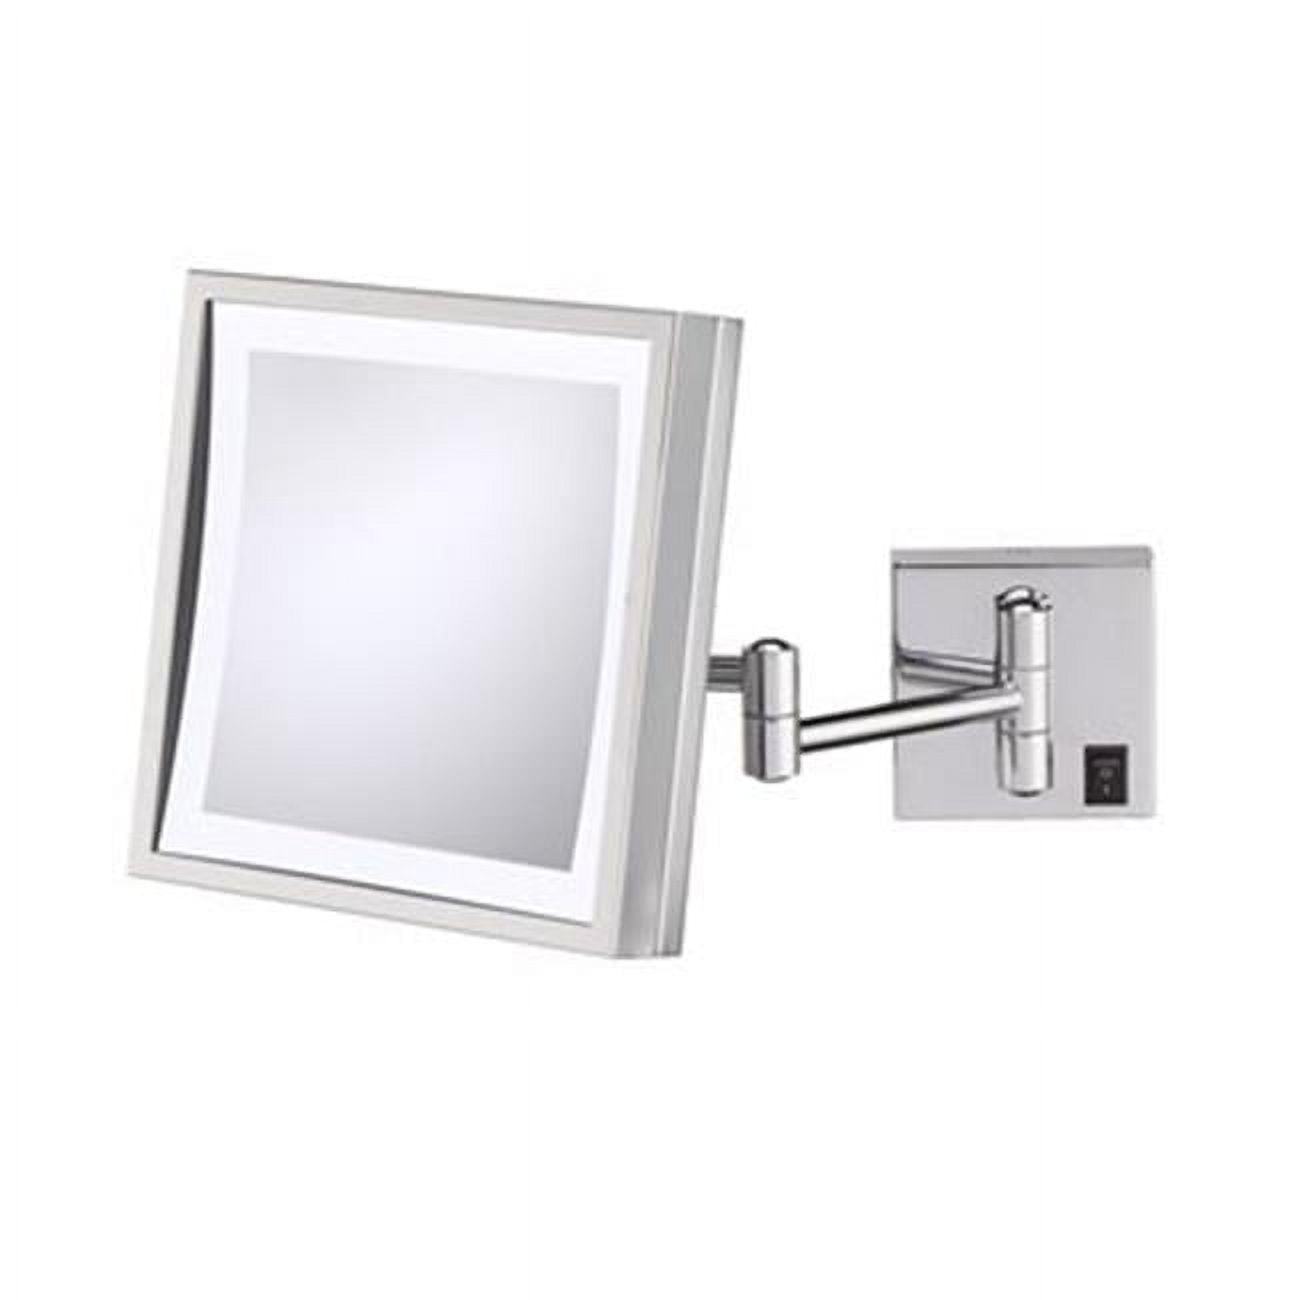 Picture of Aptations 913-55-43 Single-Sided LED Square Wall Mirror - Rechargeable, Chrome